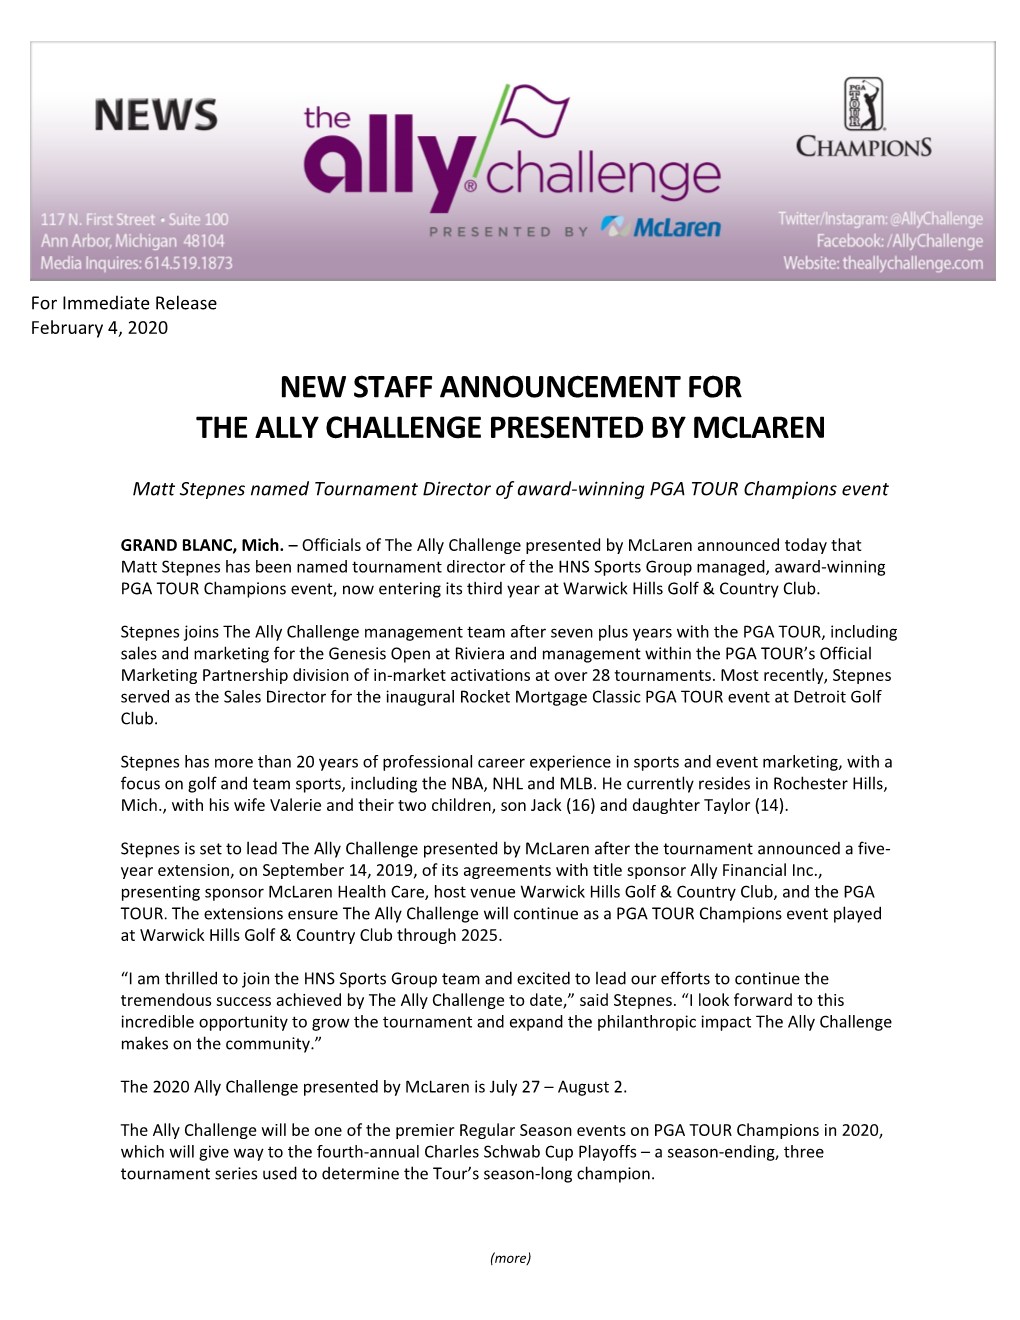 New Staff Announcement for the Ally Challenge Presented by Mclaren